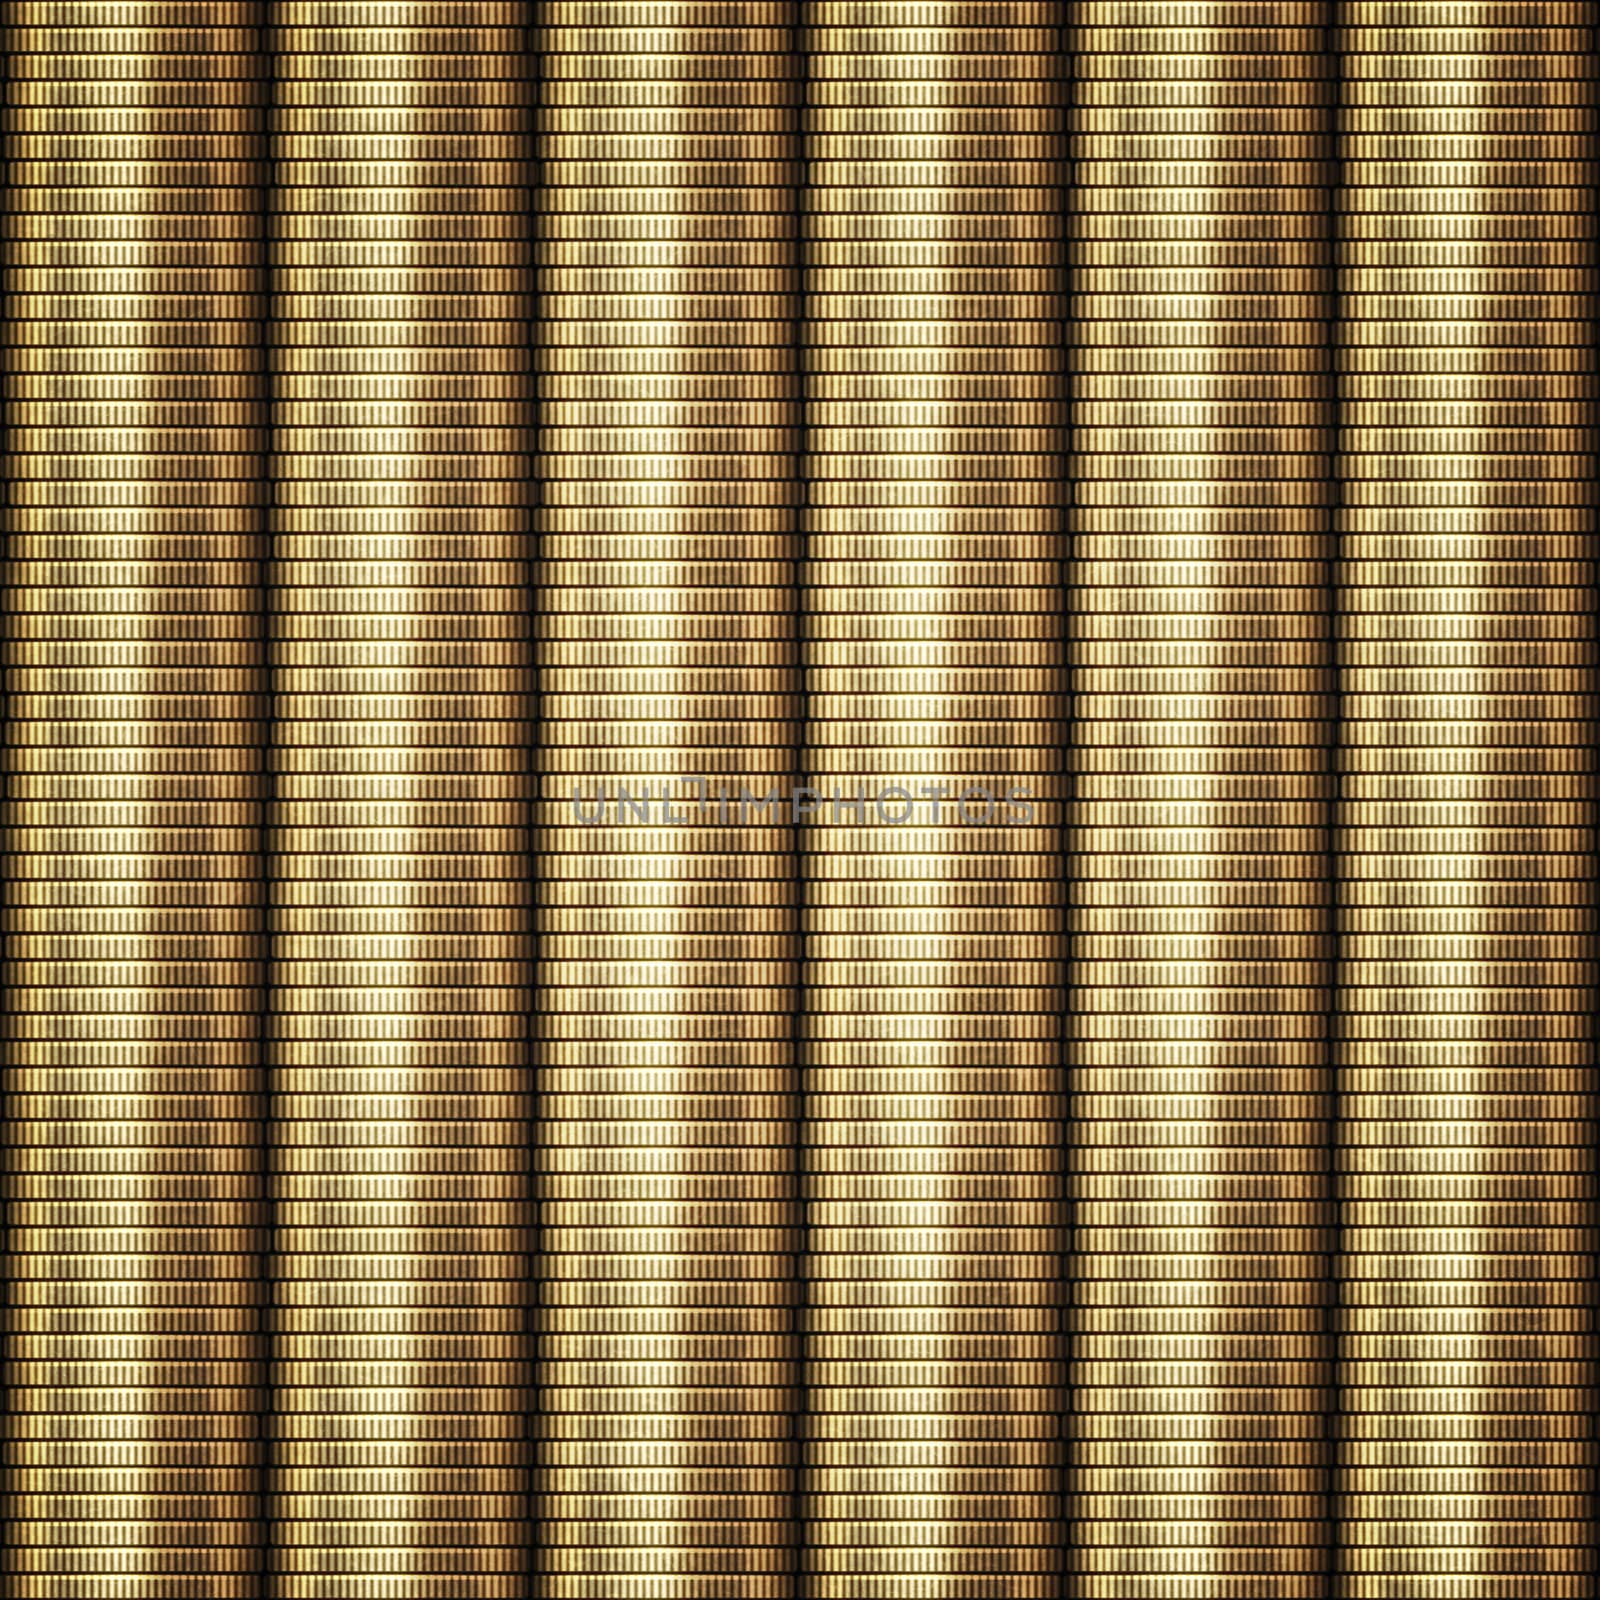 great background of rows of coins 